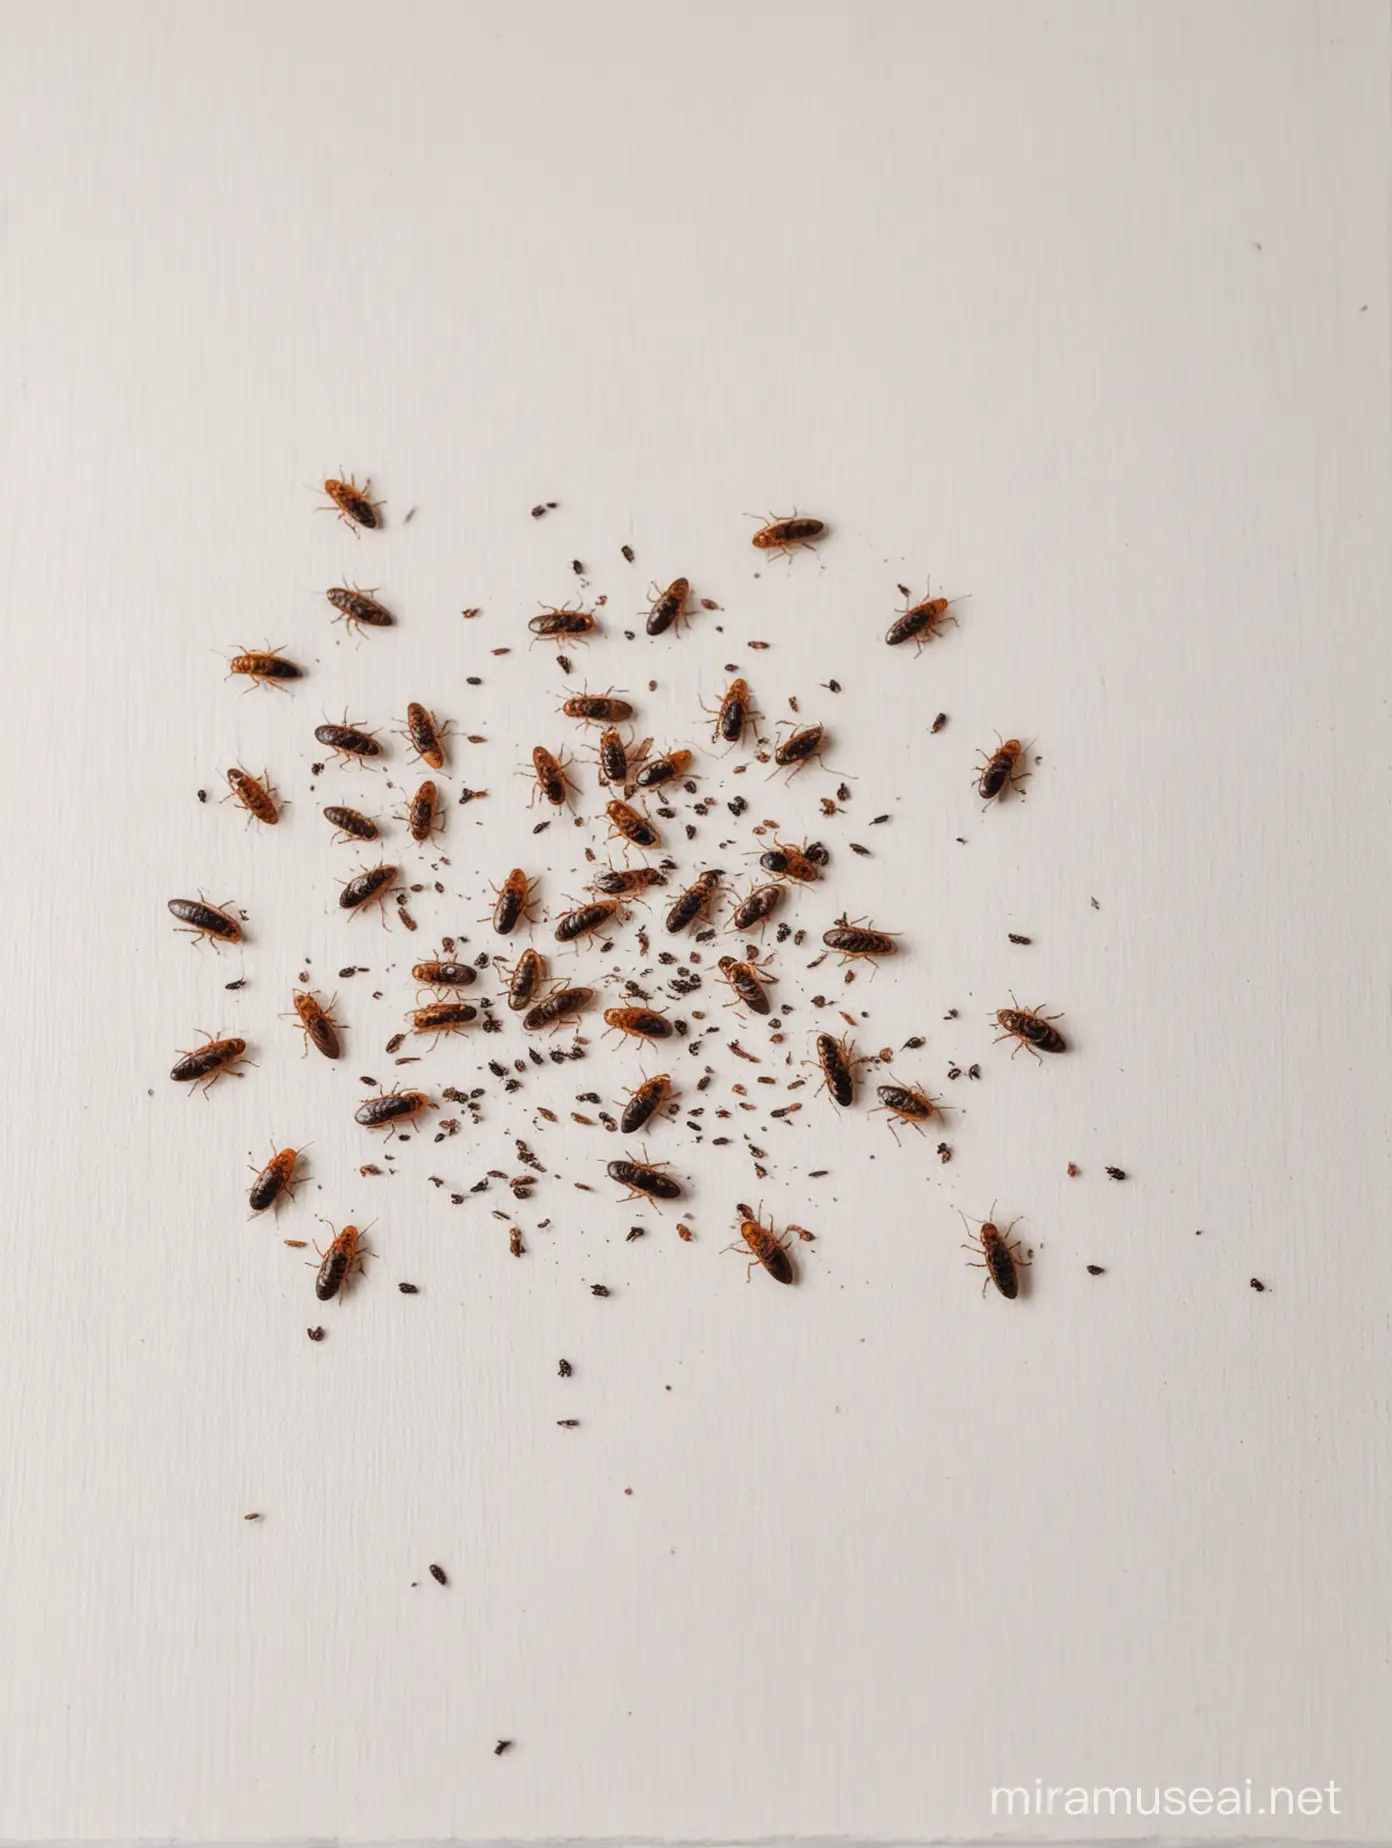 White Table Covered with Dead Flies and Cockroaches